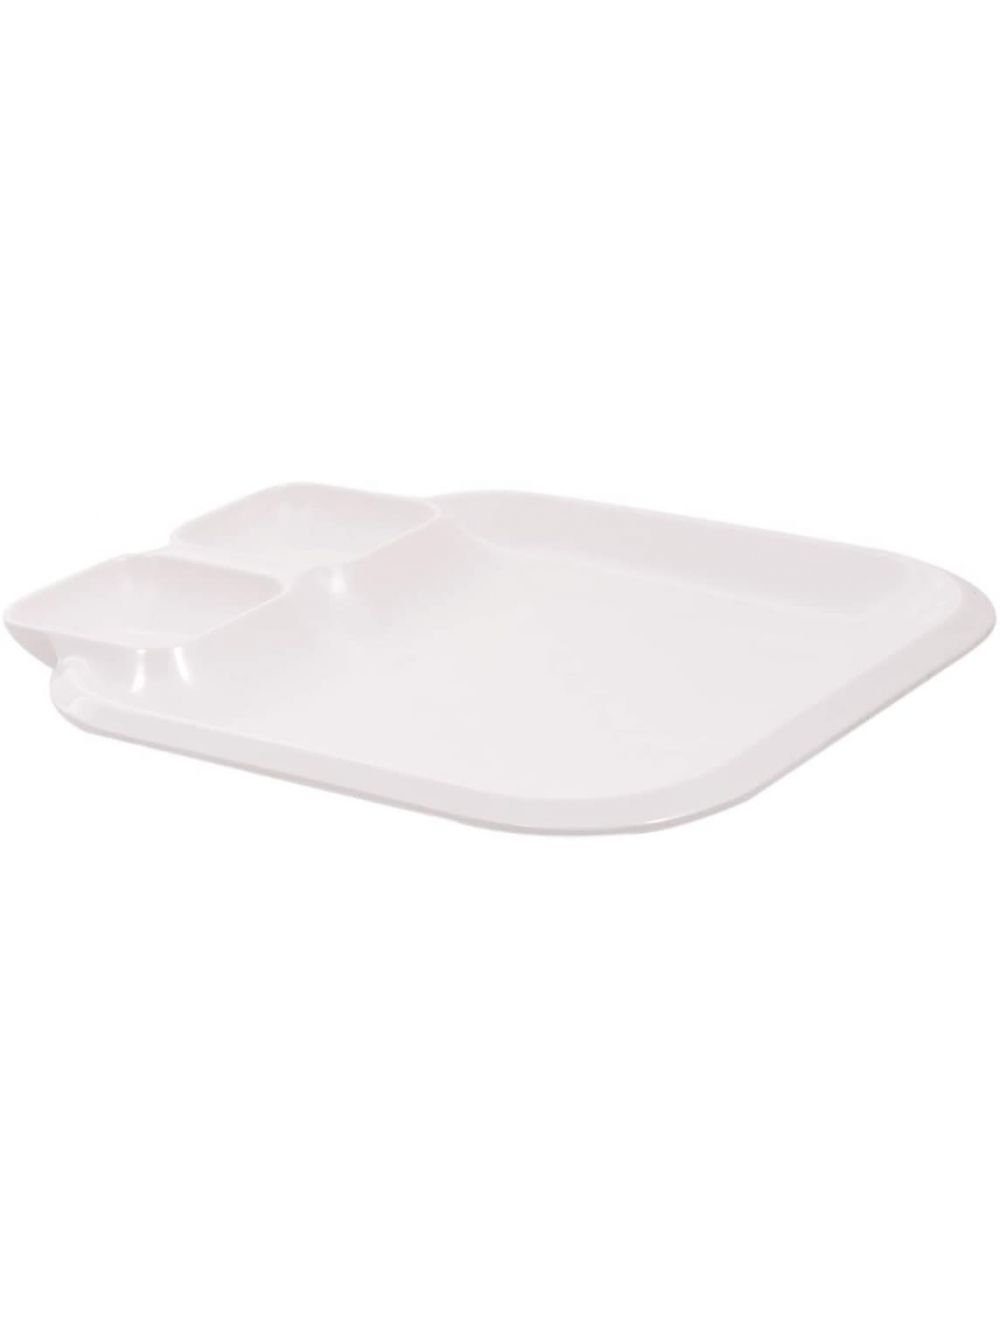 Dinewell Melamine Chip And Dip Serving Tray White-DWT1040W